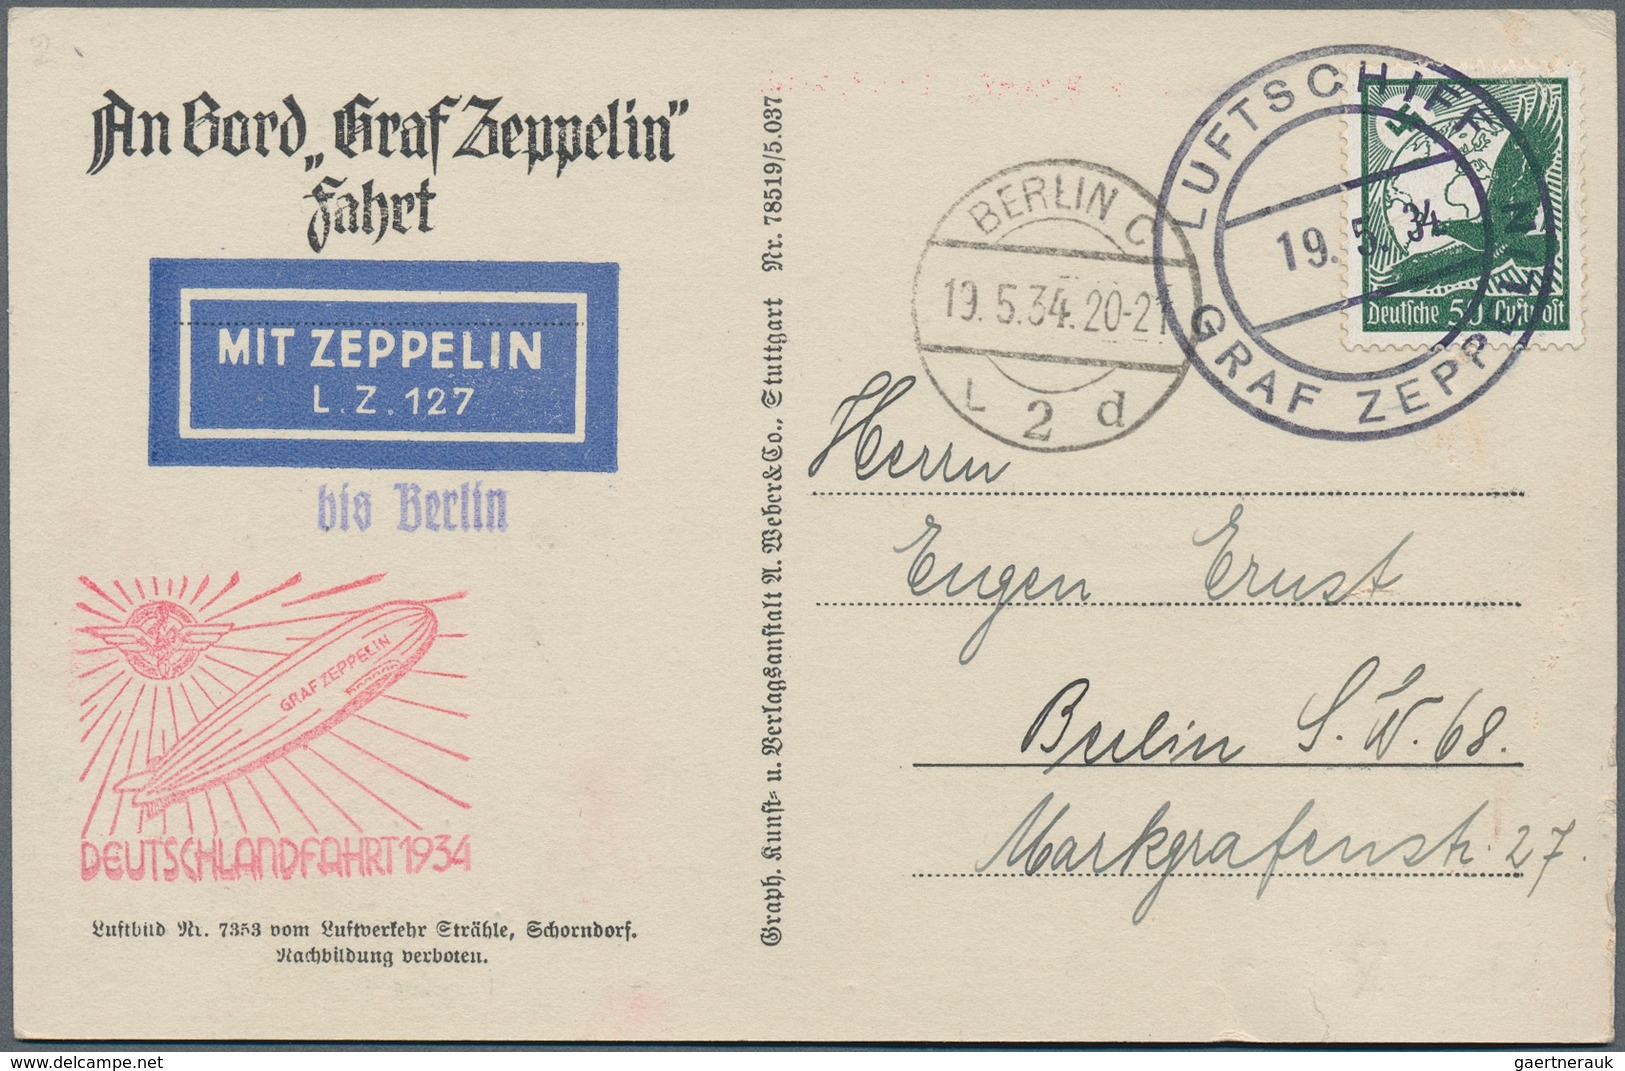 Zeppelinpost Europa: Collection of over 110 Zeppelin items, mostly flown covers with a large number